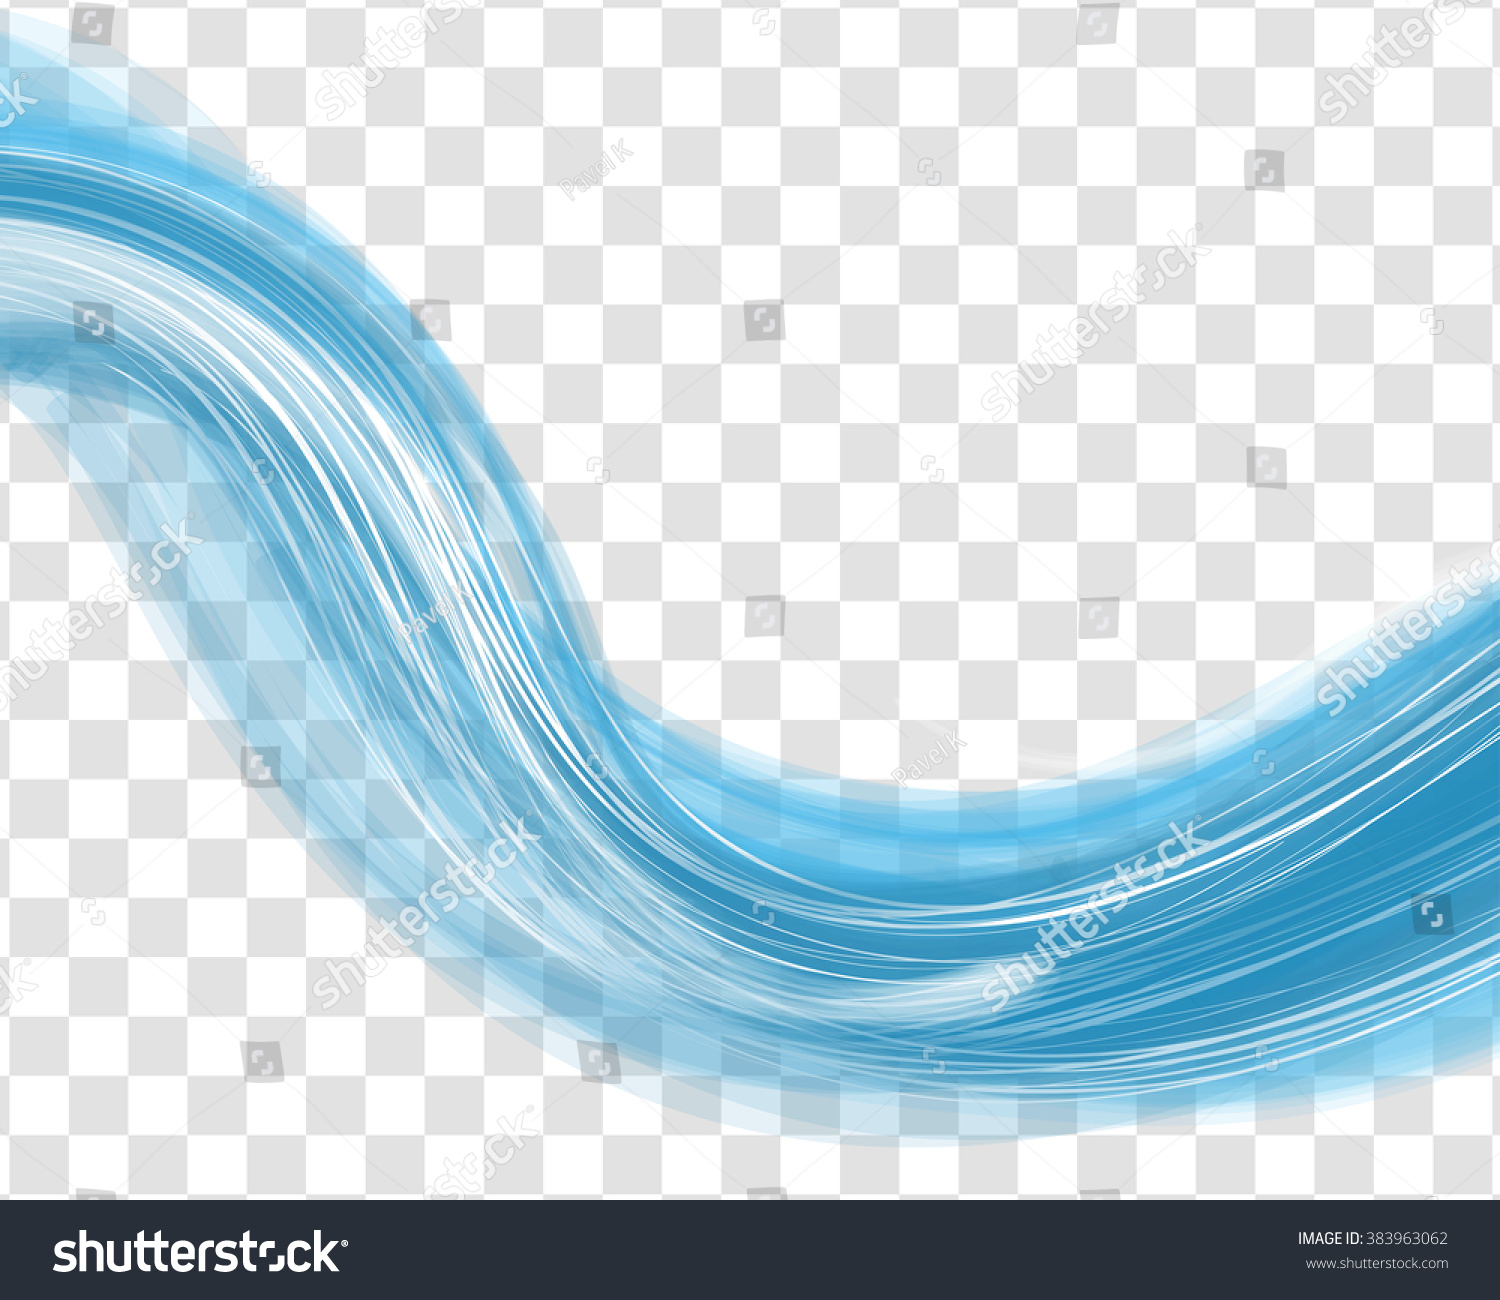 Wave Background PNG - 166100